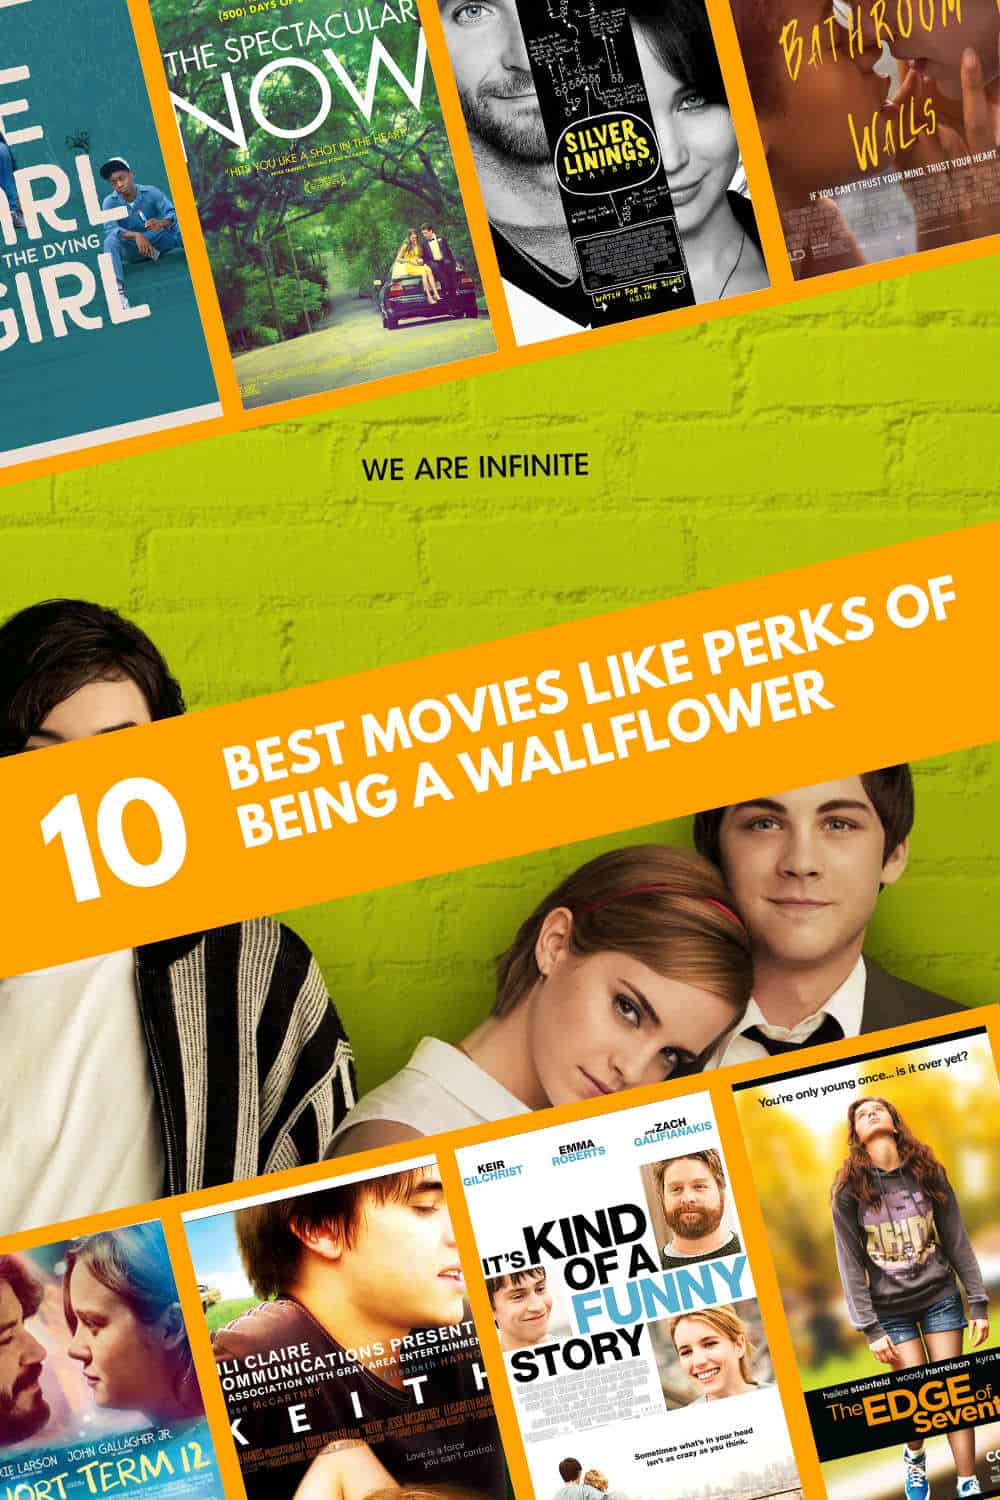 Movies Like Perks of Being a Wallflower